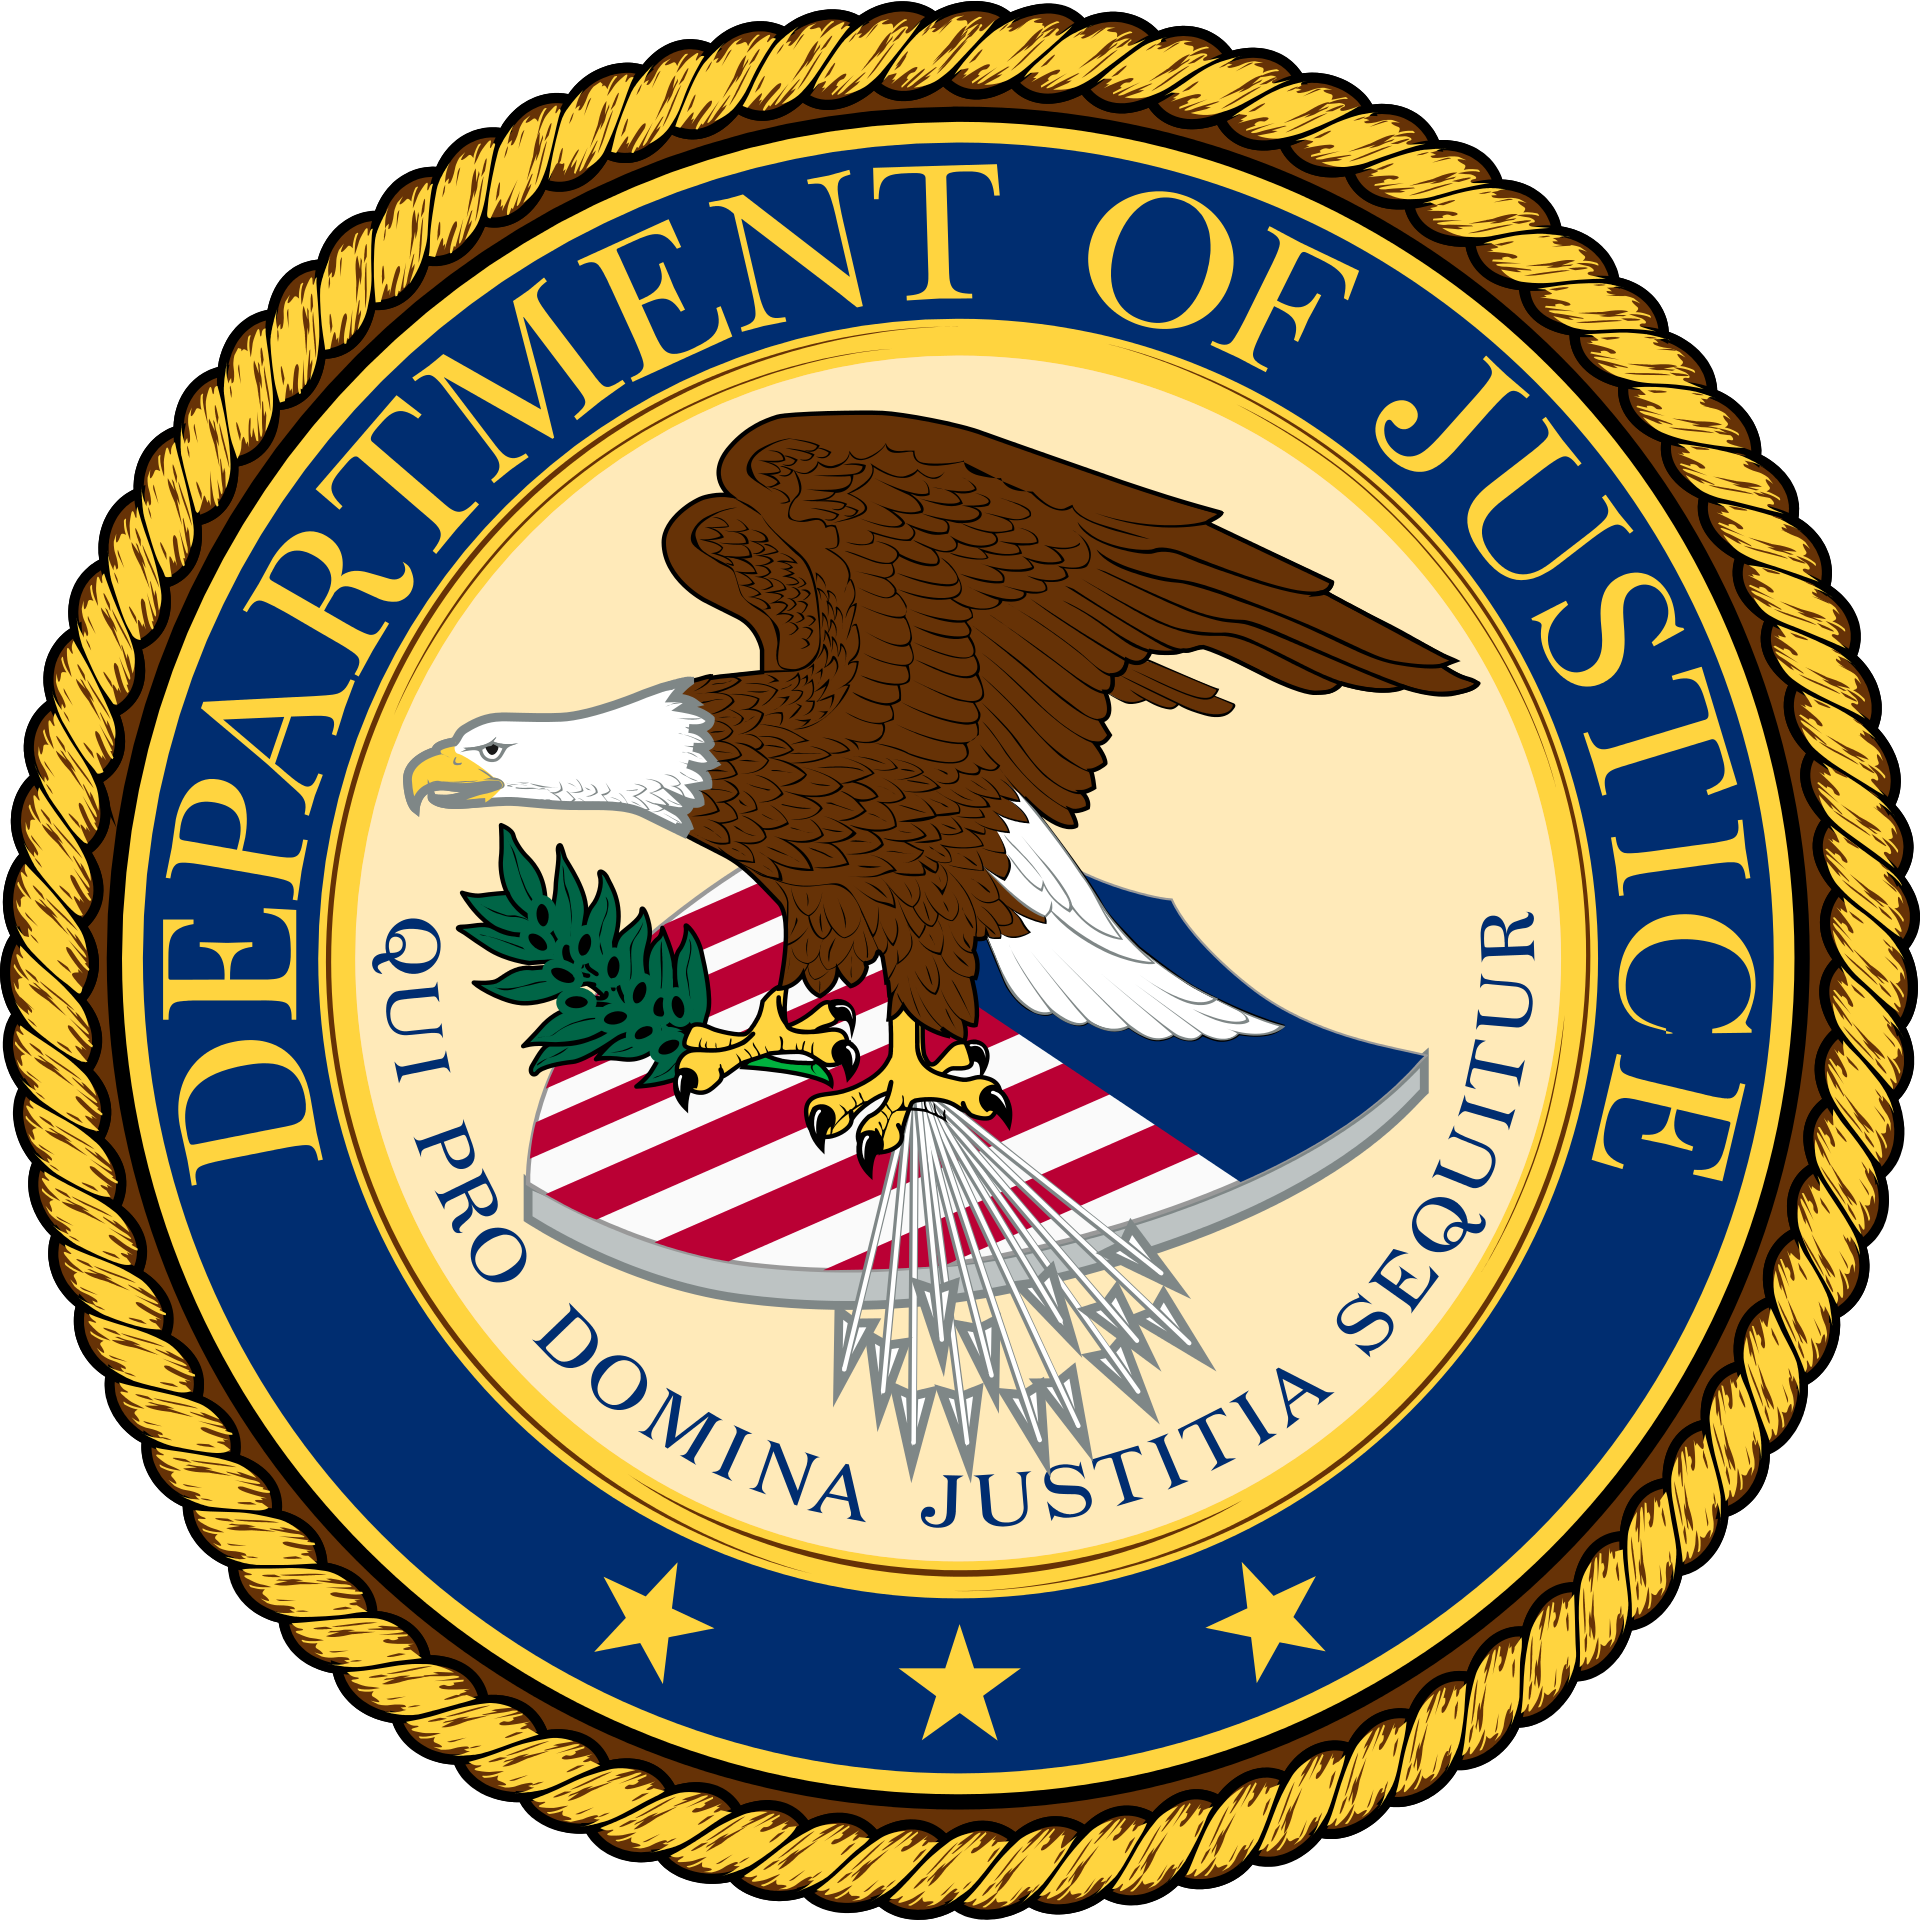 United States Department of Justice - Wikipedia